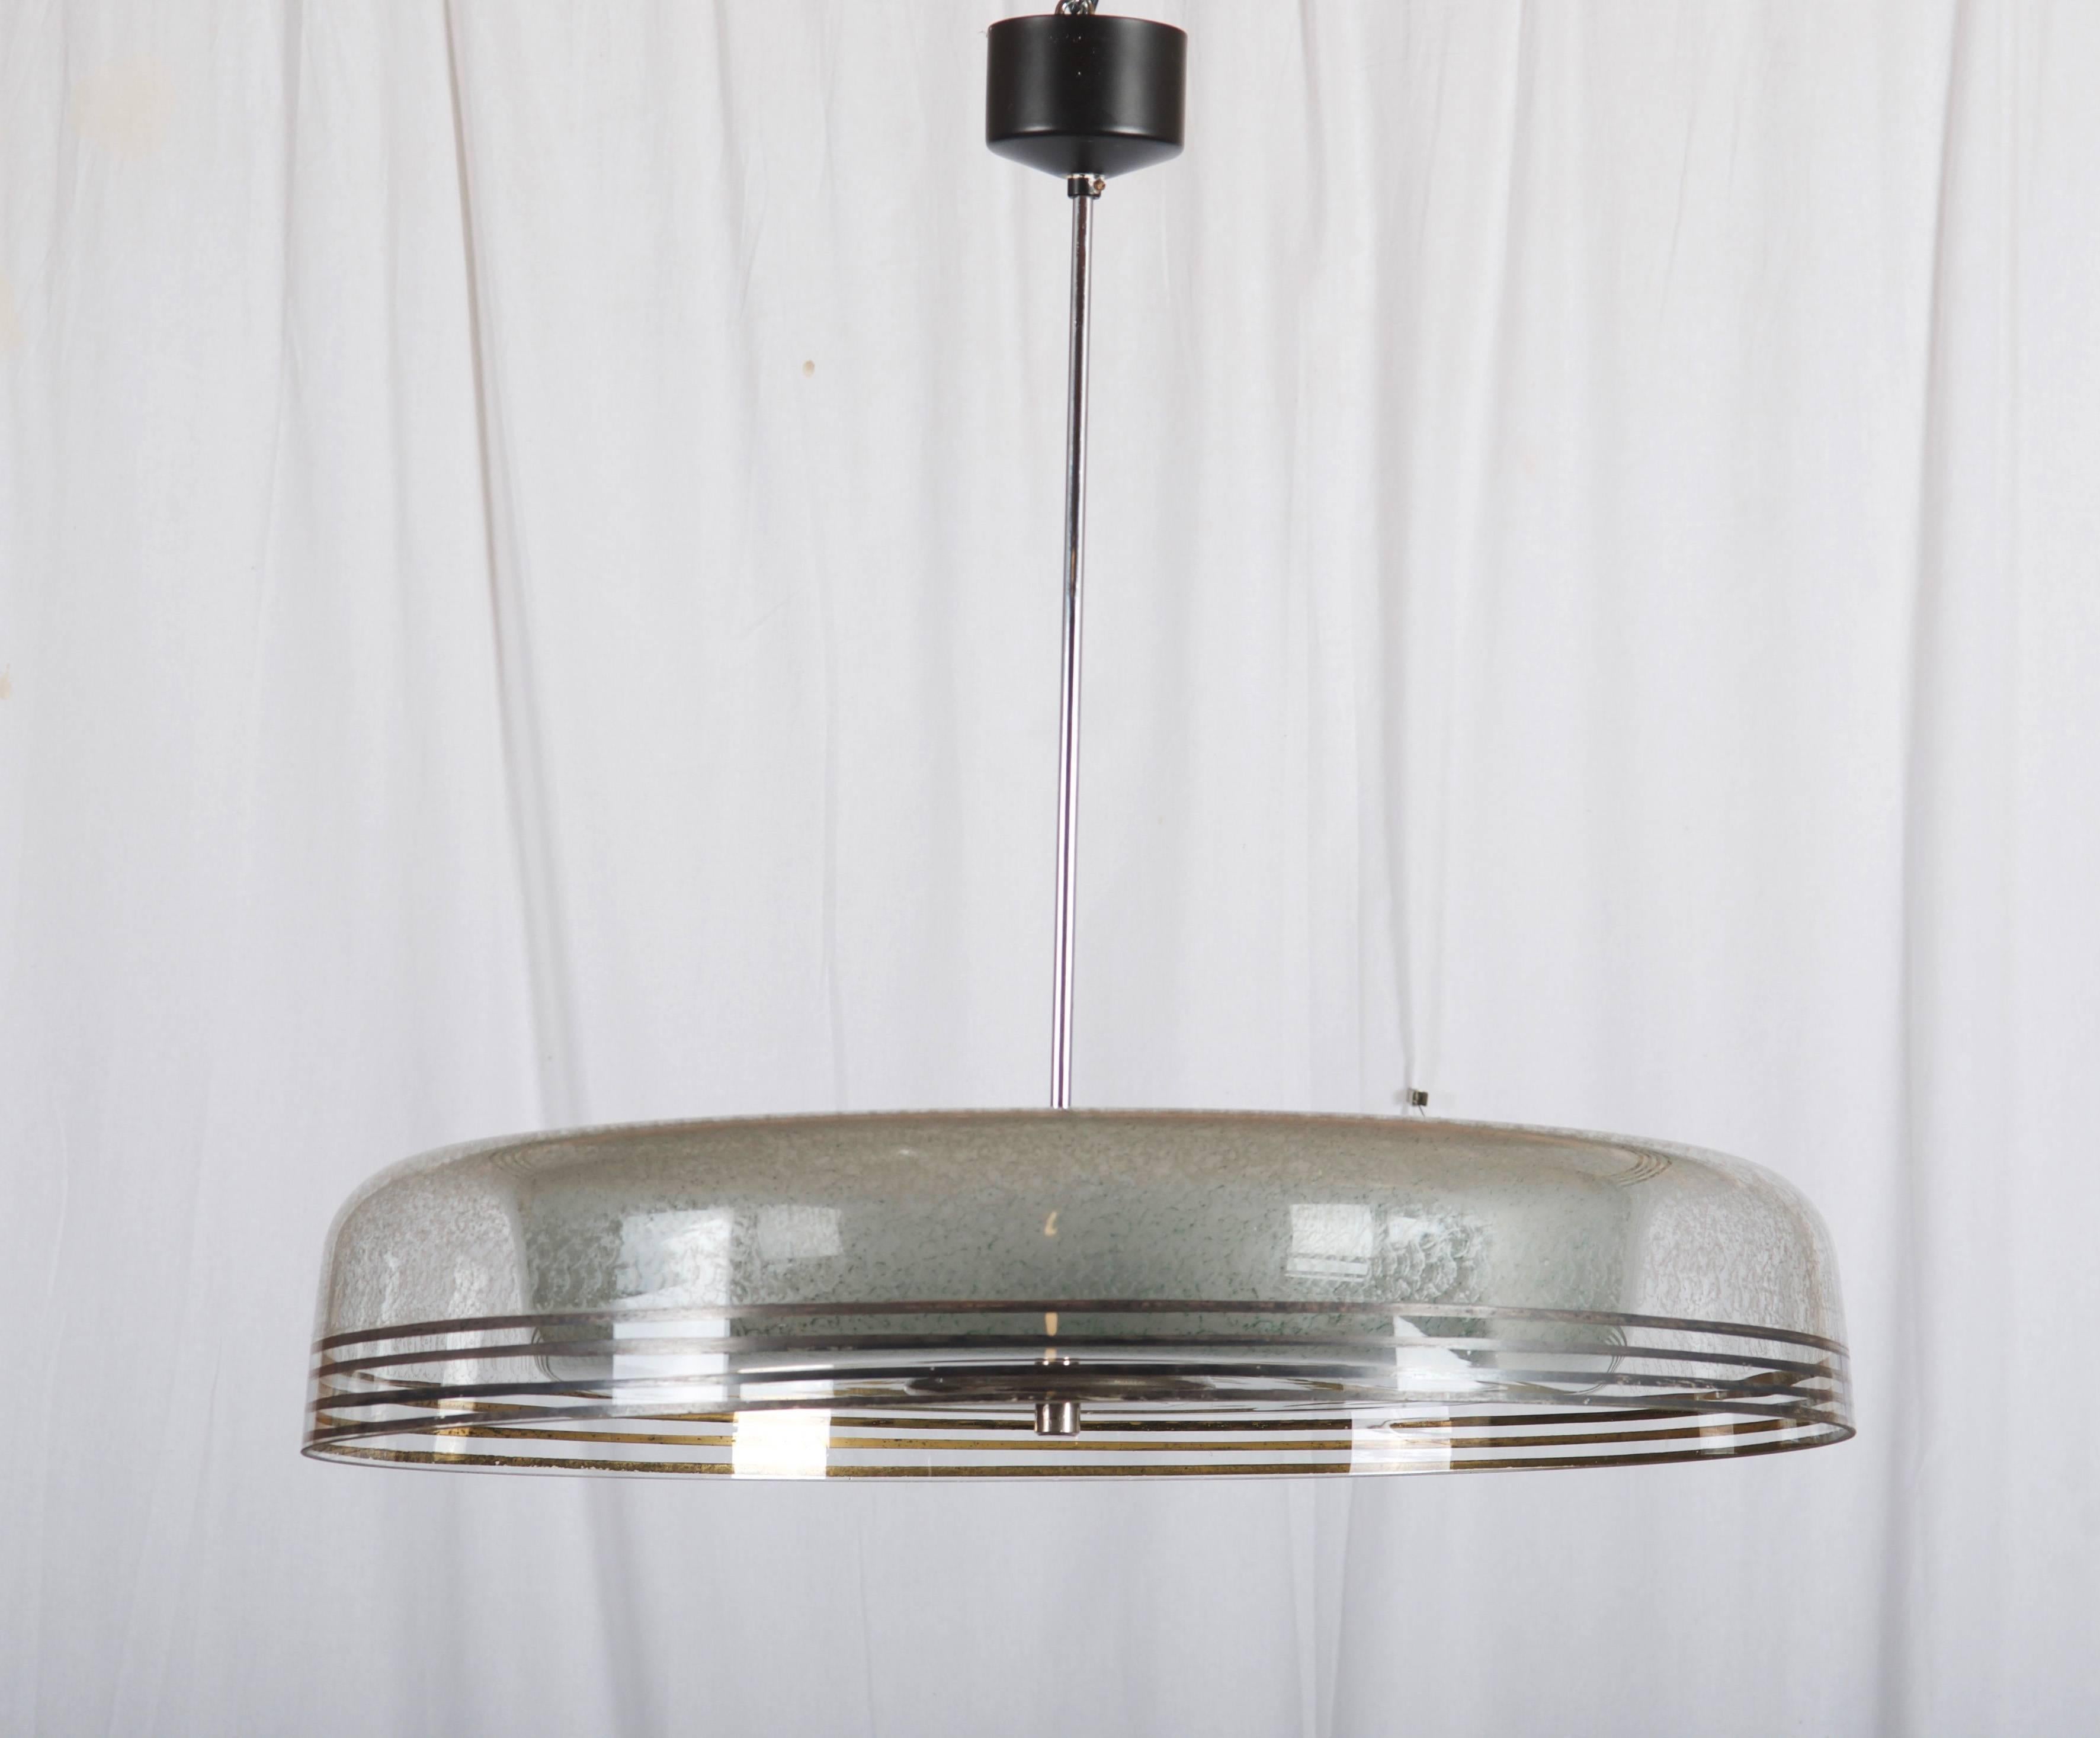 Elegant glass shade on a steel hanger fitted with three E27 sockets up to 60watts each.
Total length can be customized.
Made by Napako in the late 1950s.